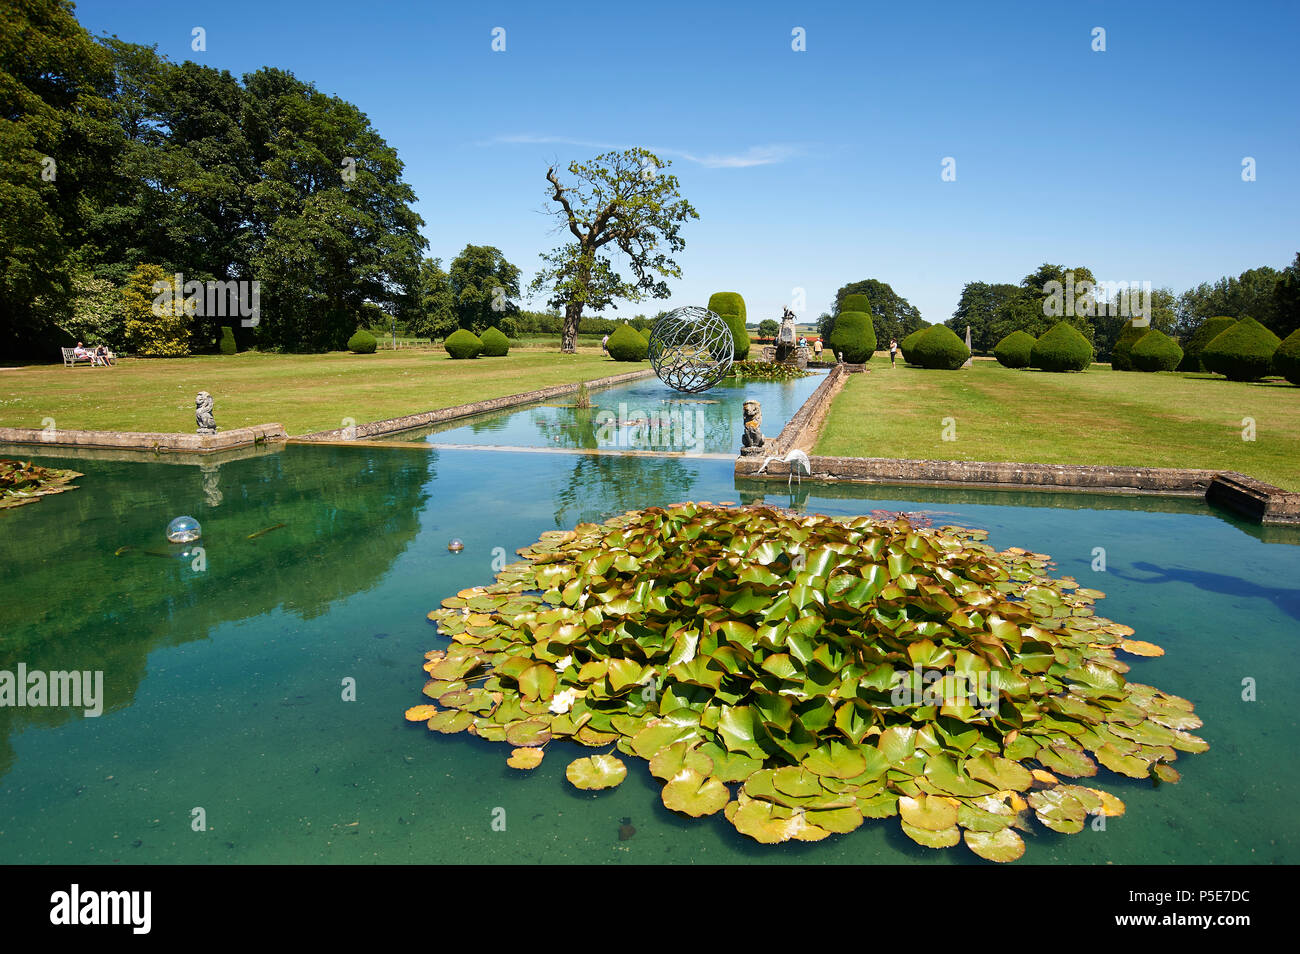 People enjoying the formal gardens and water features of Burton Agnes Hall, East Riding of Yorkshire, England, UK, GB Stock Photo